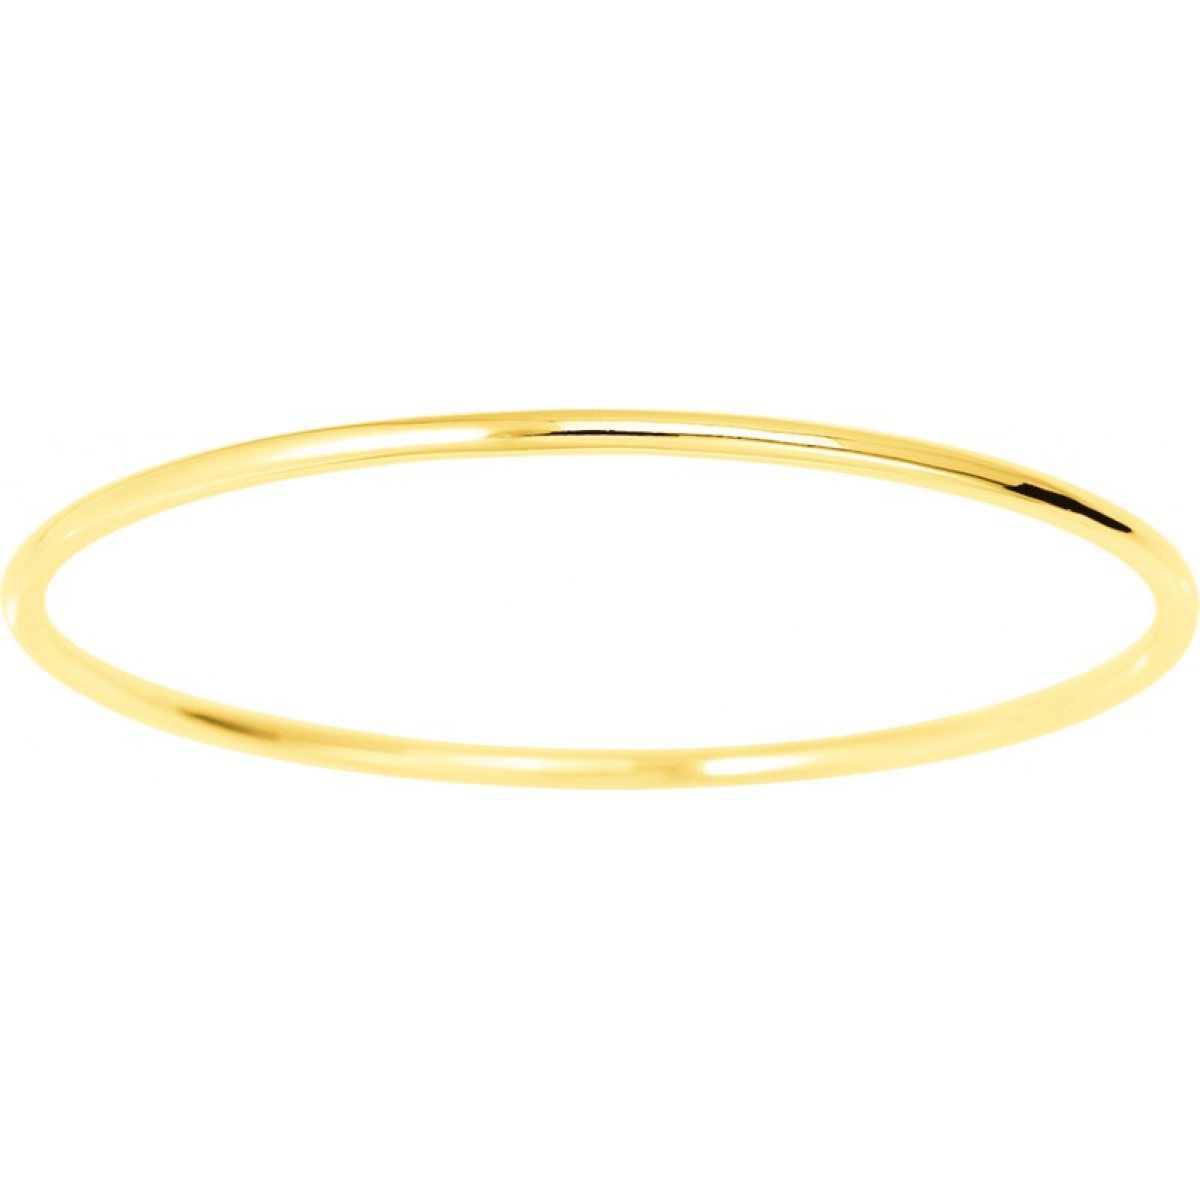 Bangle round wire solid 18K YG - Size: 42  Lua Blanca  358.145.42